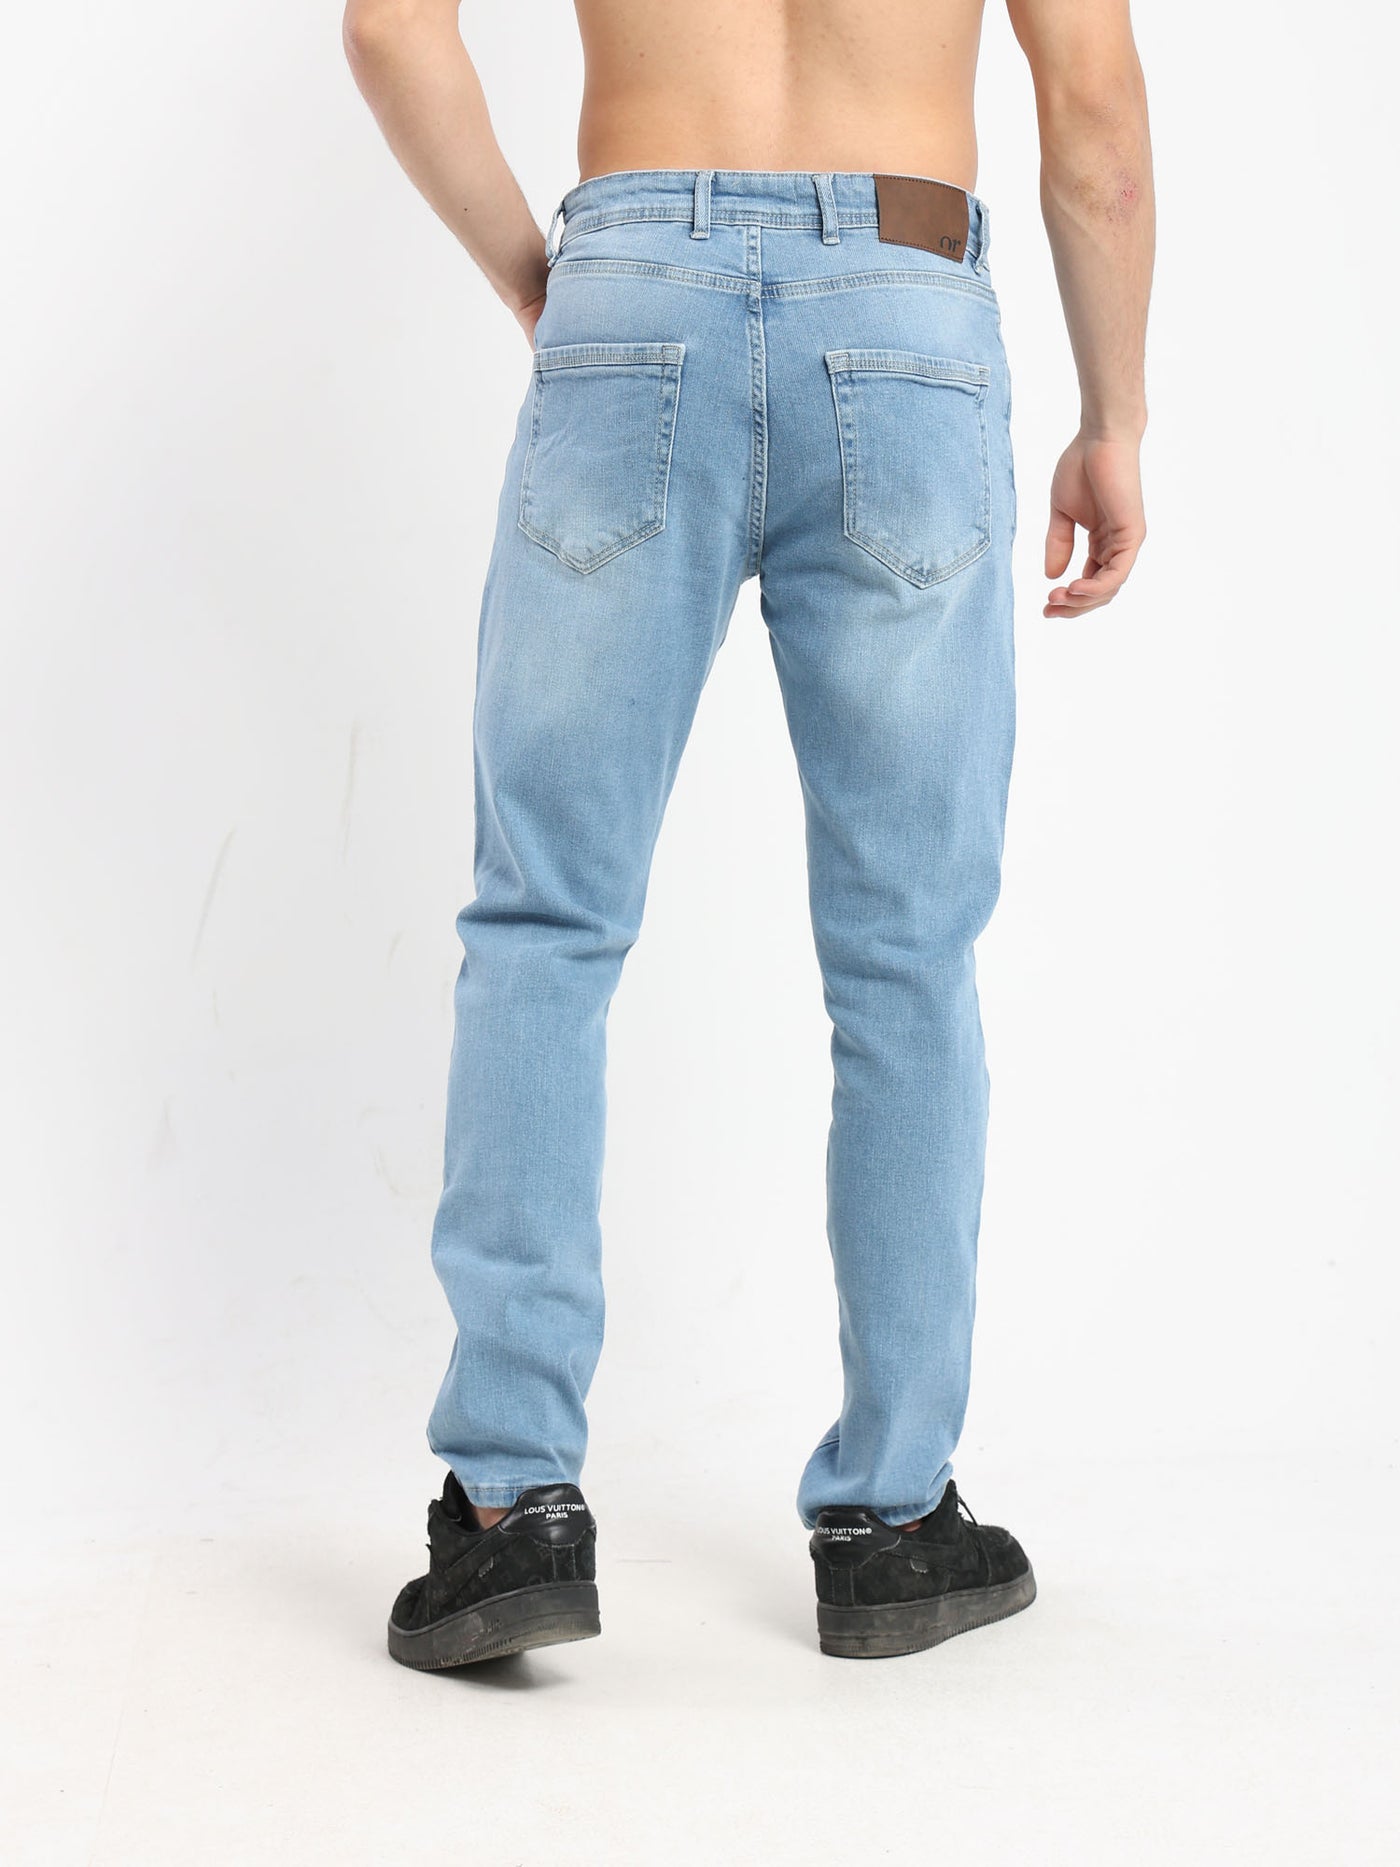 Jeans - Slim Fit - With Pockets